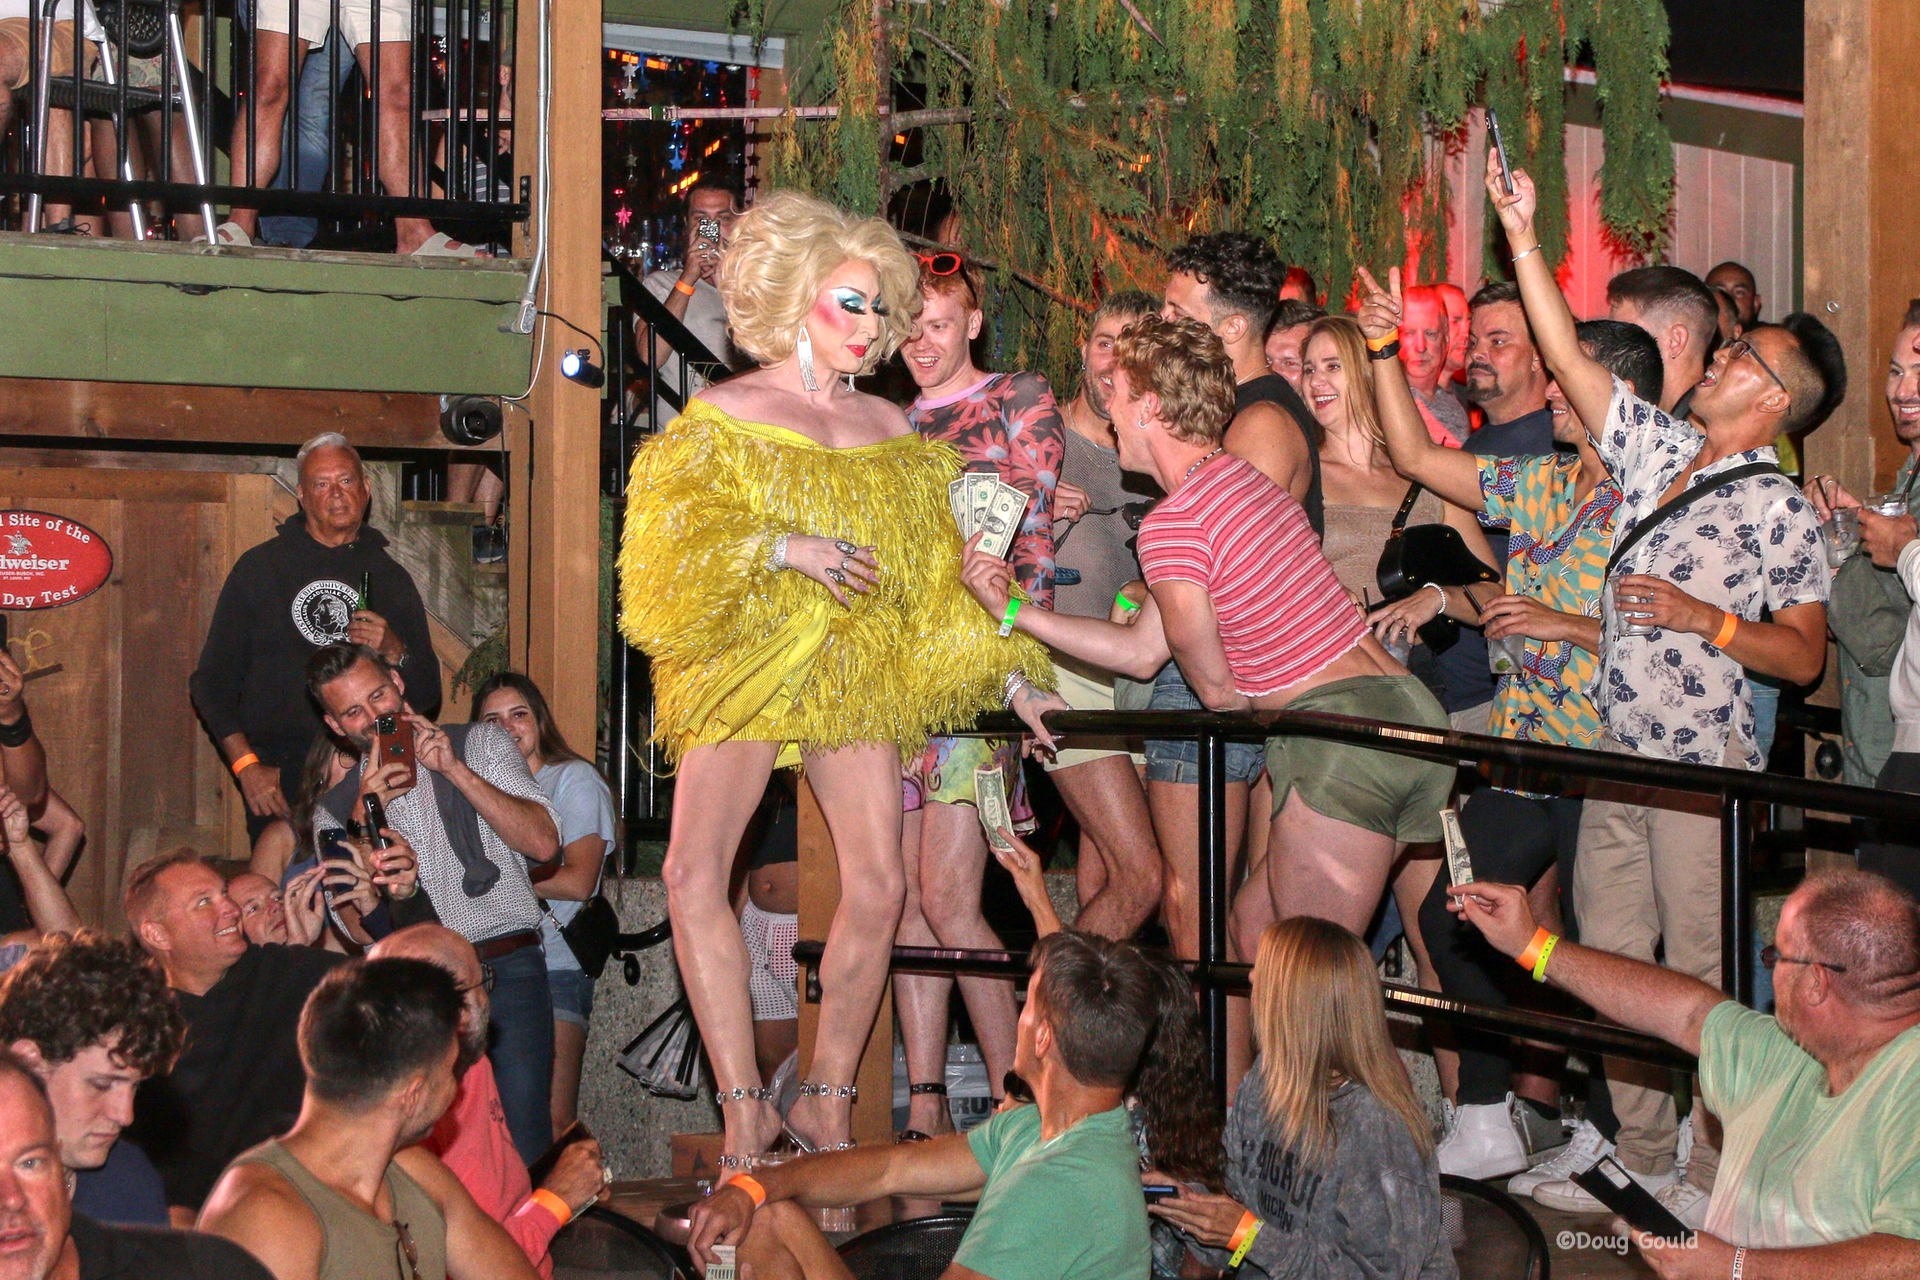 Detox interacts with fans and Dunes Resort guest